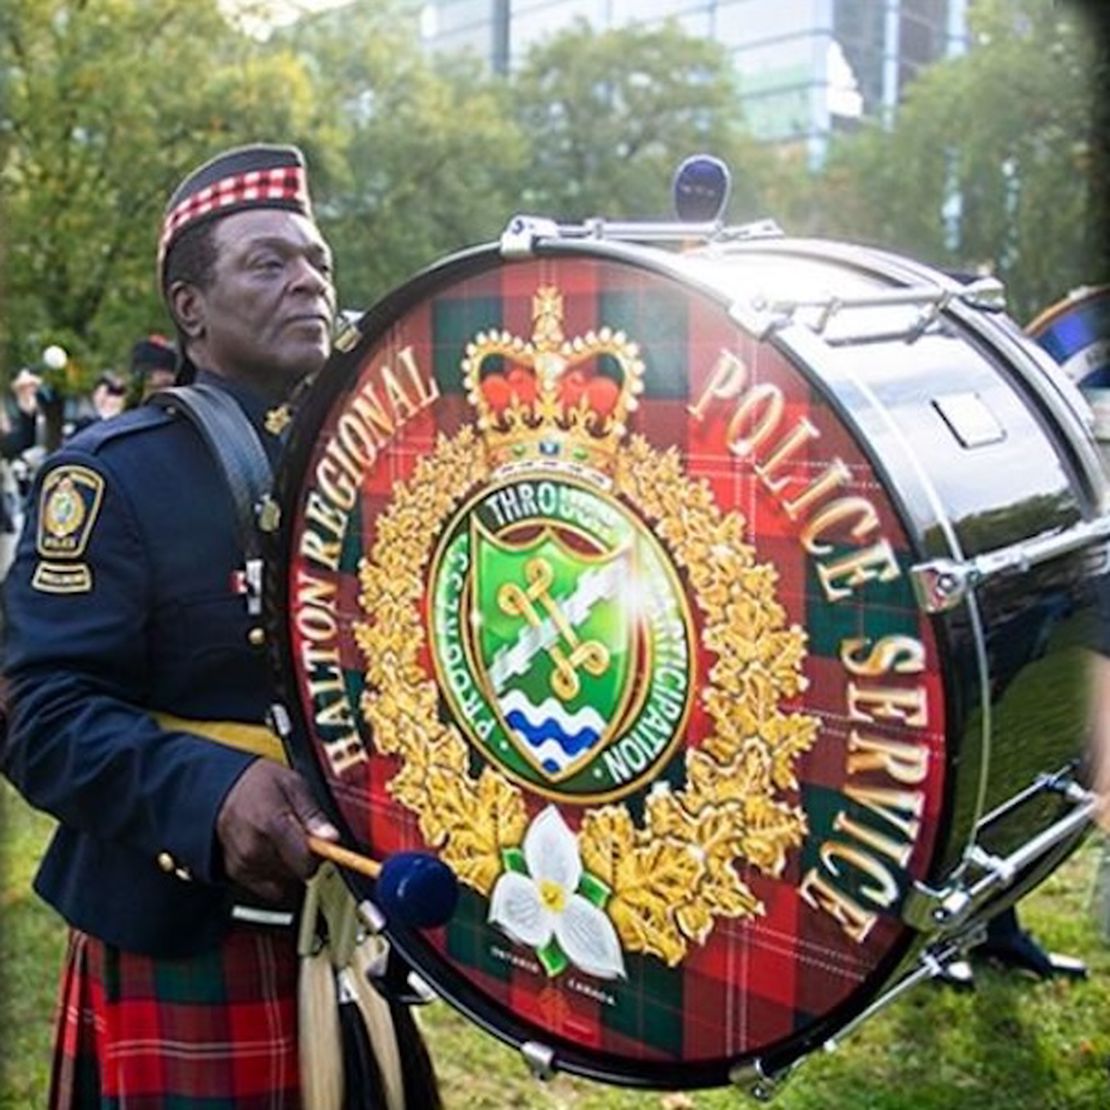 Halton Regional Police Service (HRPS) Pipes and Drums